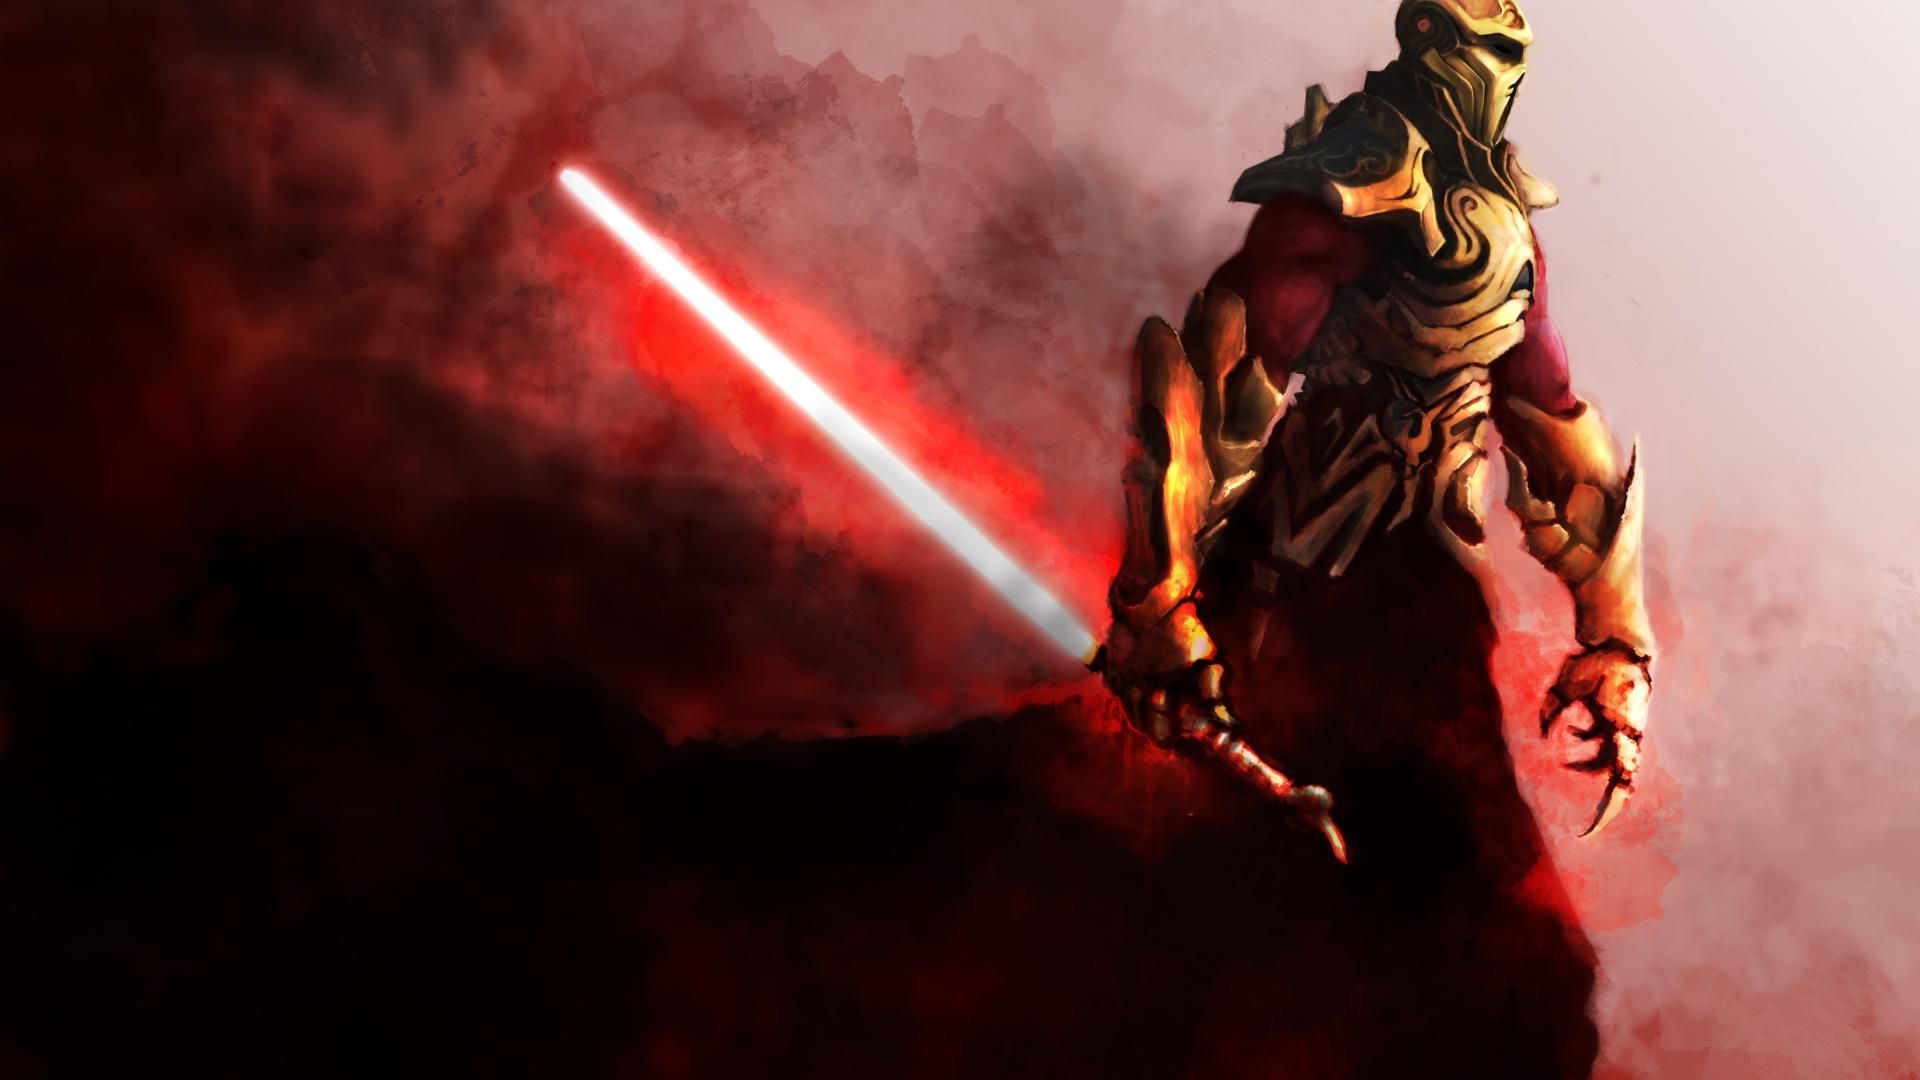 Sith star wars wars the old republic wallpaper | (88816)